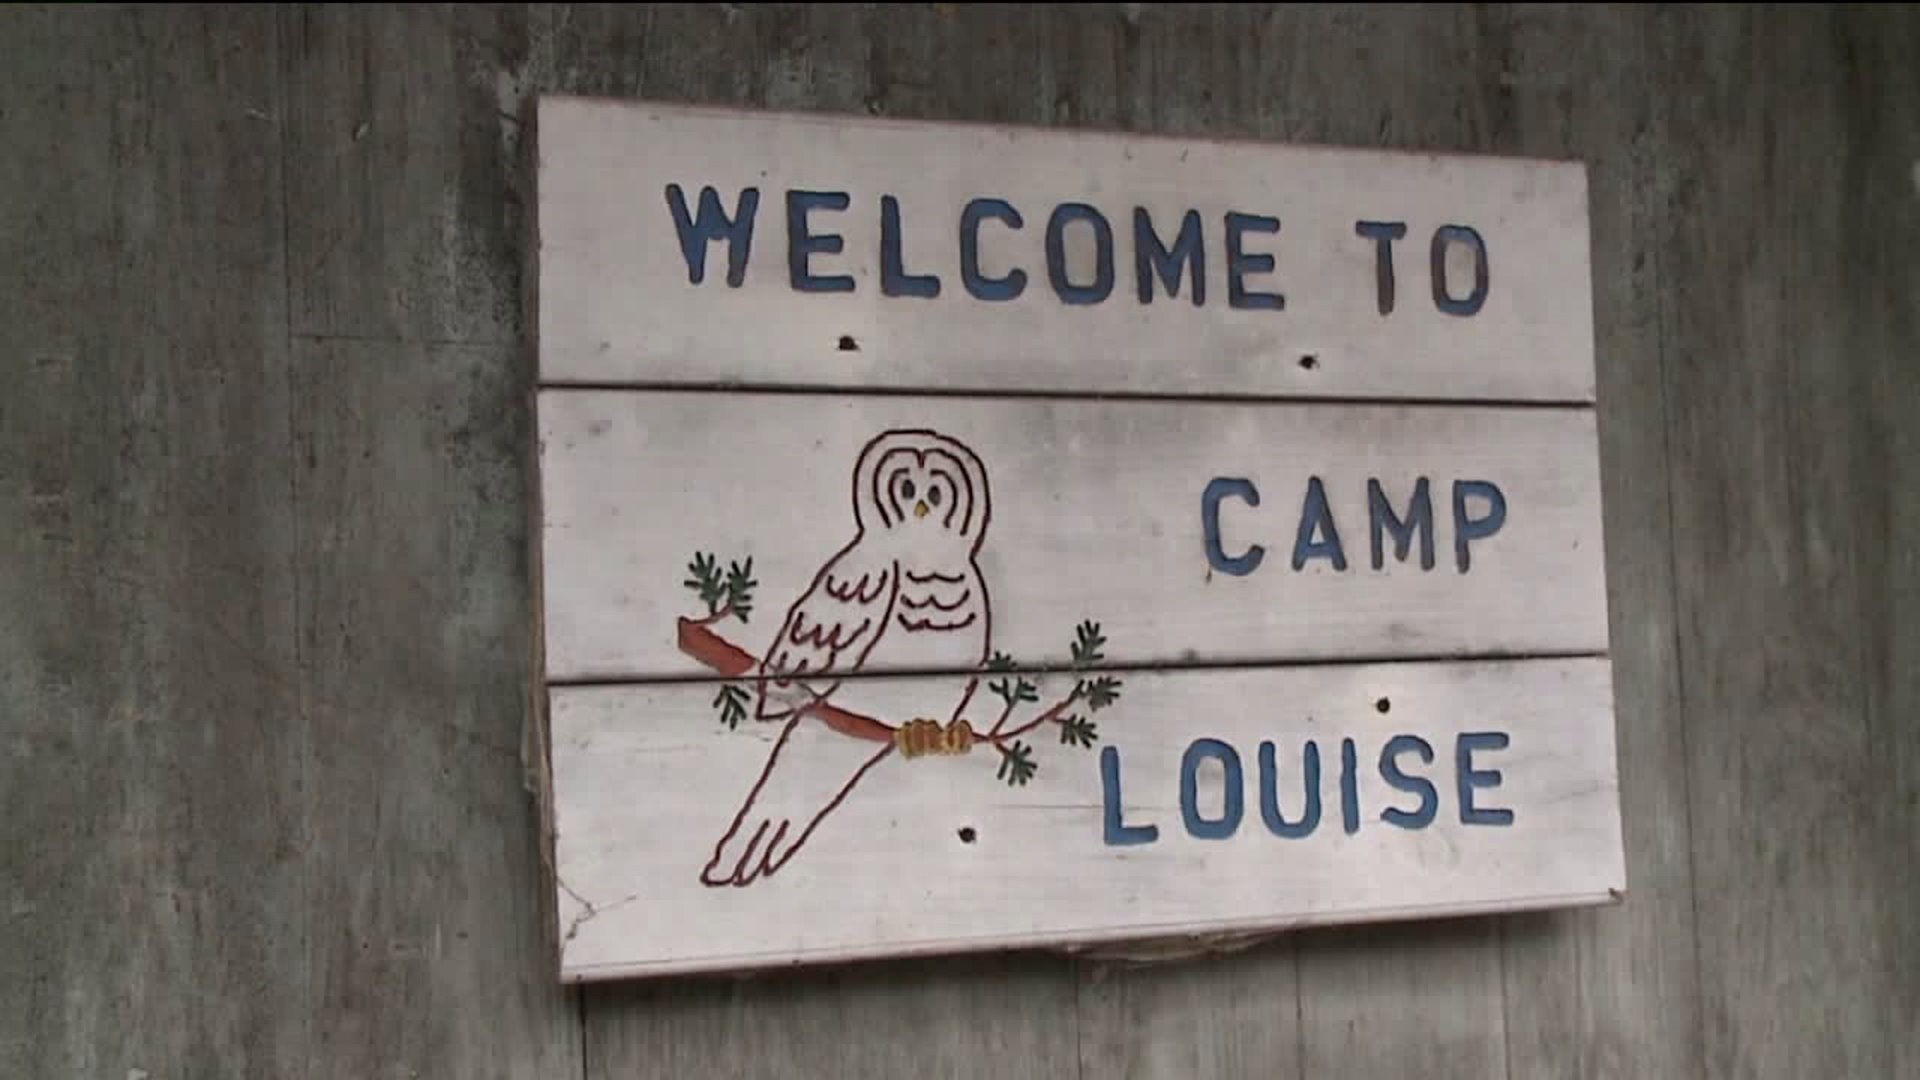 New Life for Camp Louise